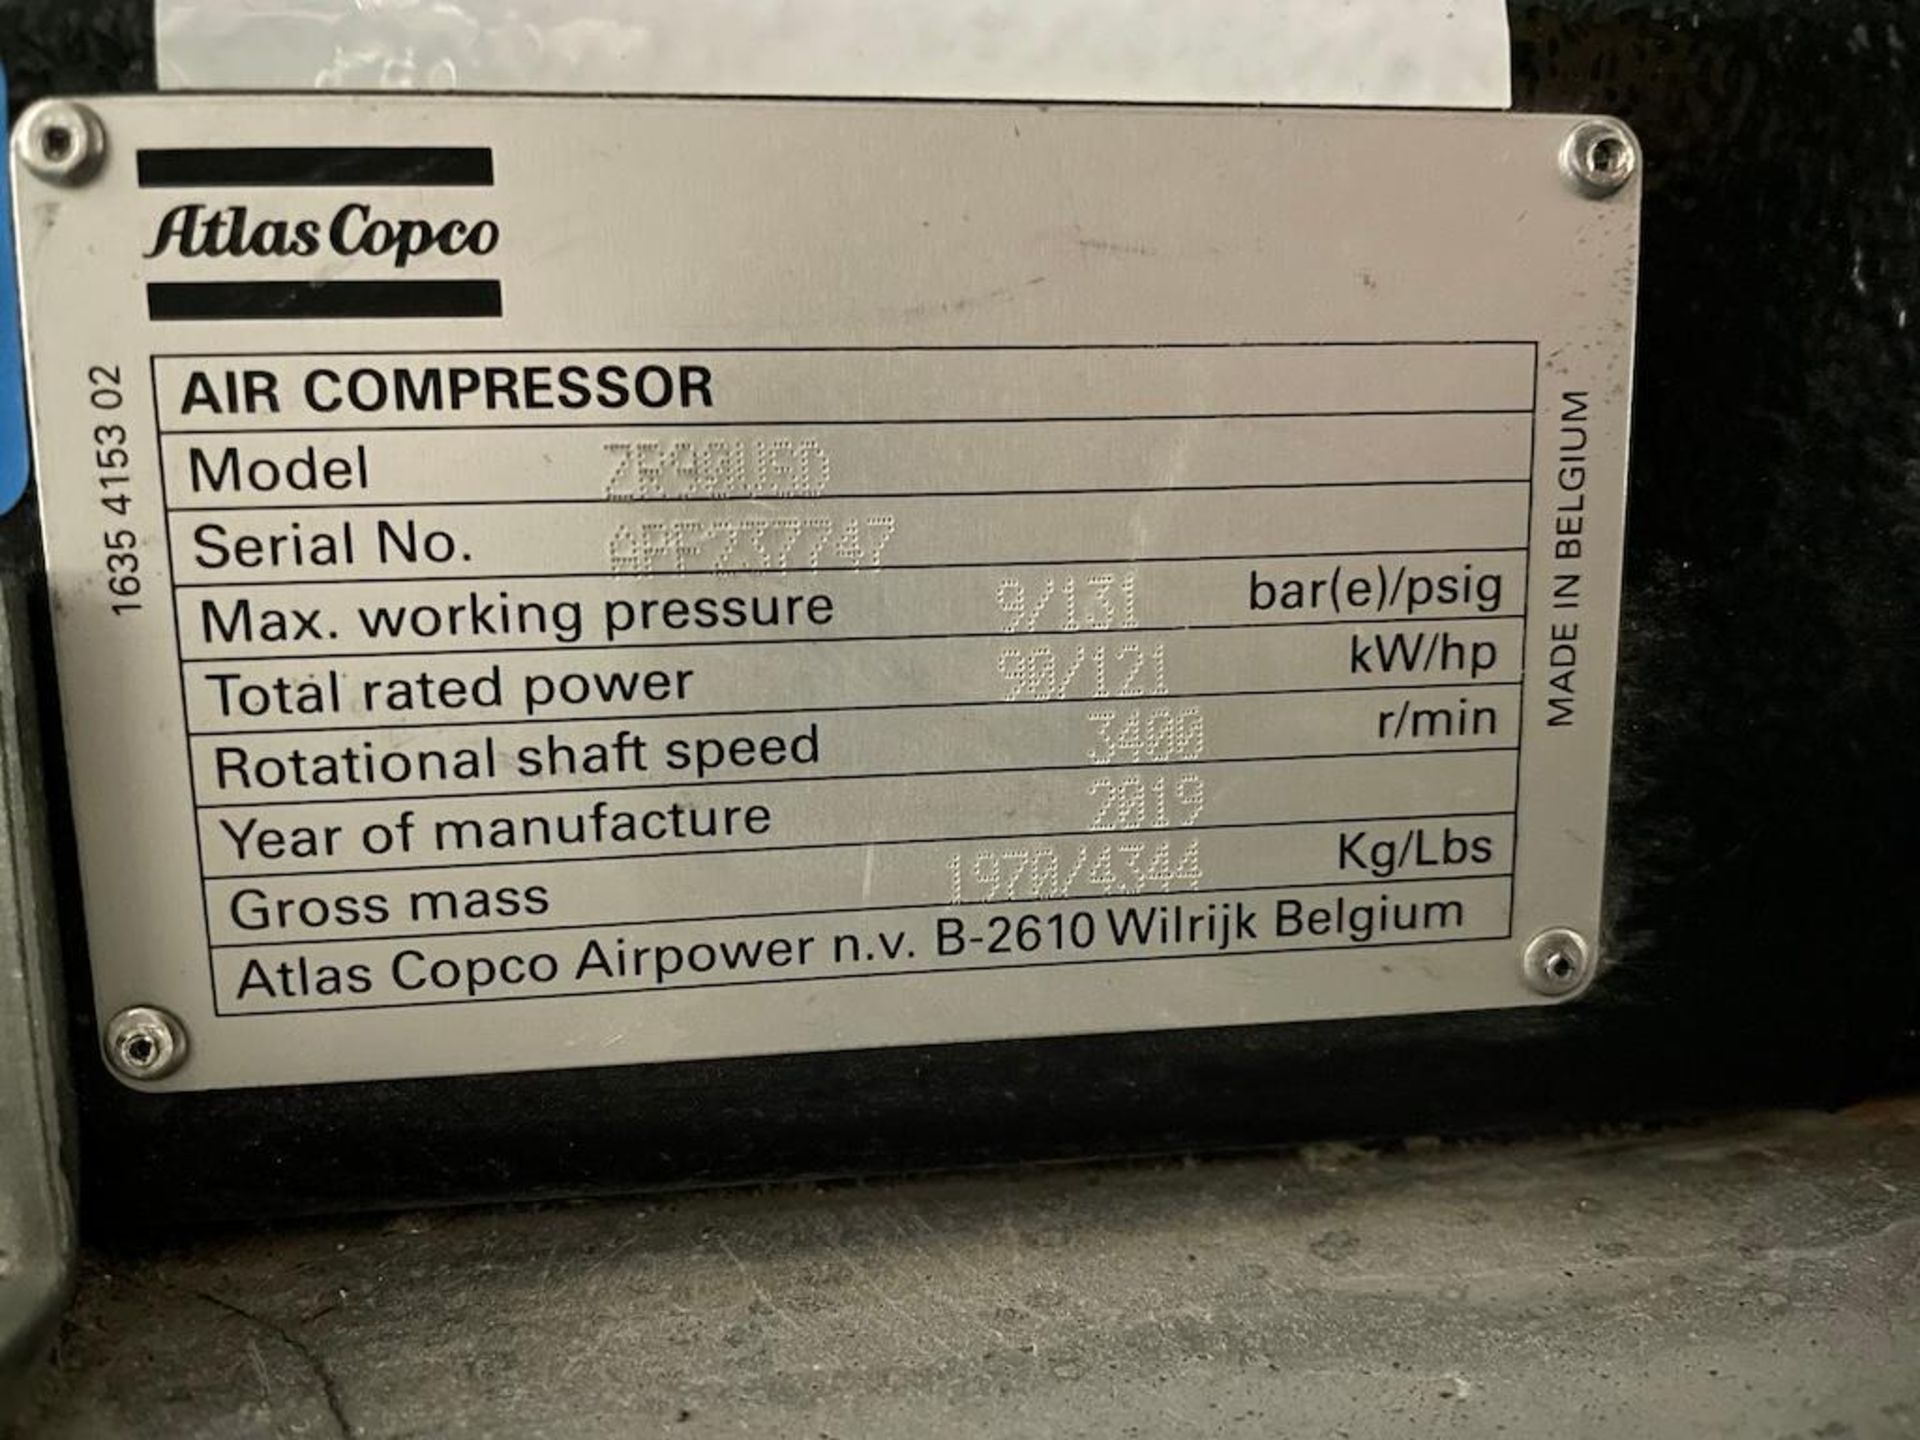 2019 ATLAS COPCO ZR 90 VSD AIR COMPRESSORS, 121 HP, 6808 HOURS AT TIME OF WRITING FEB 2, SN APF23774 - Image 3 of 12